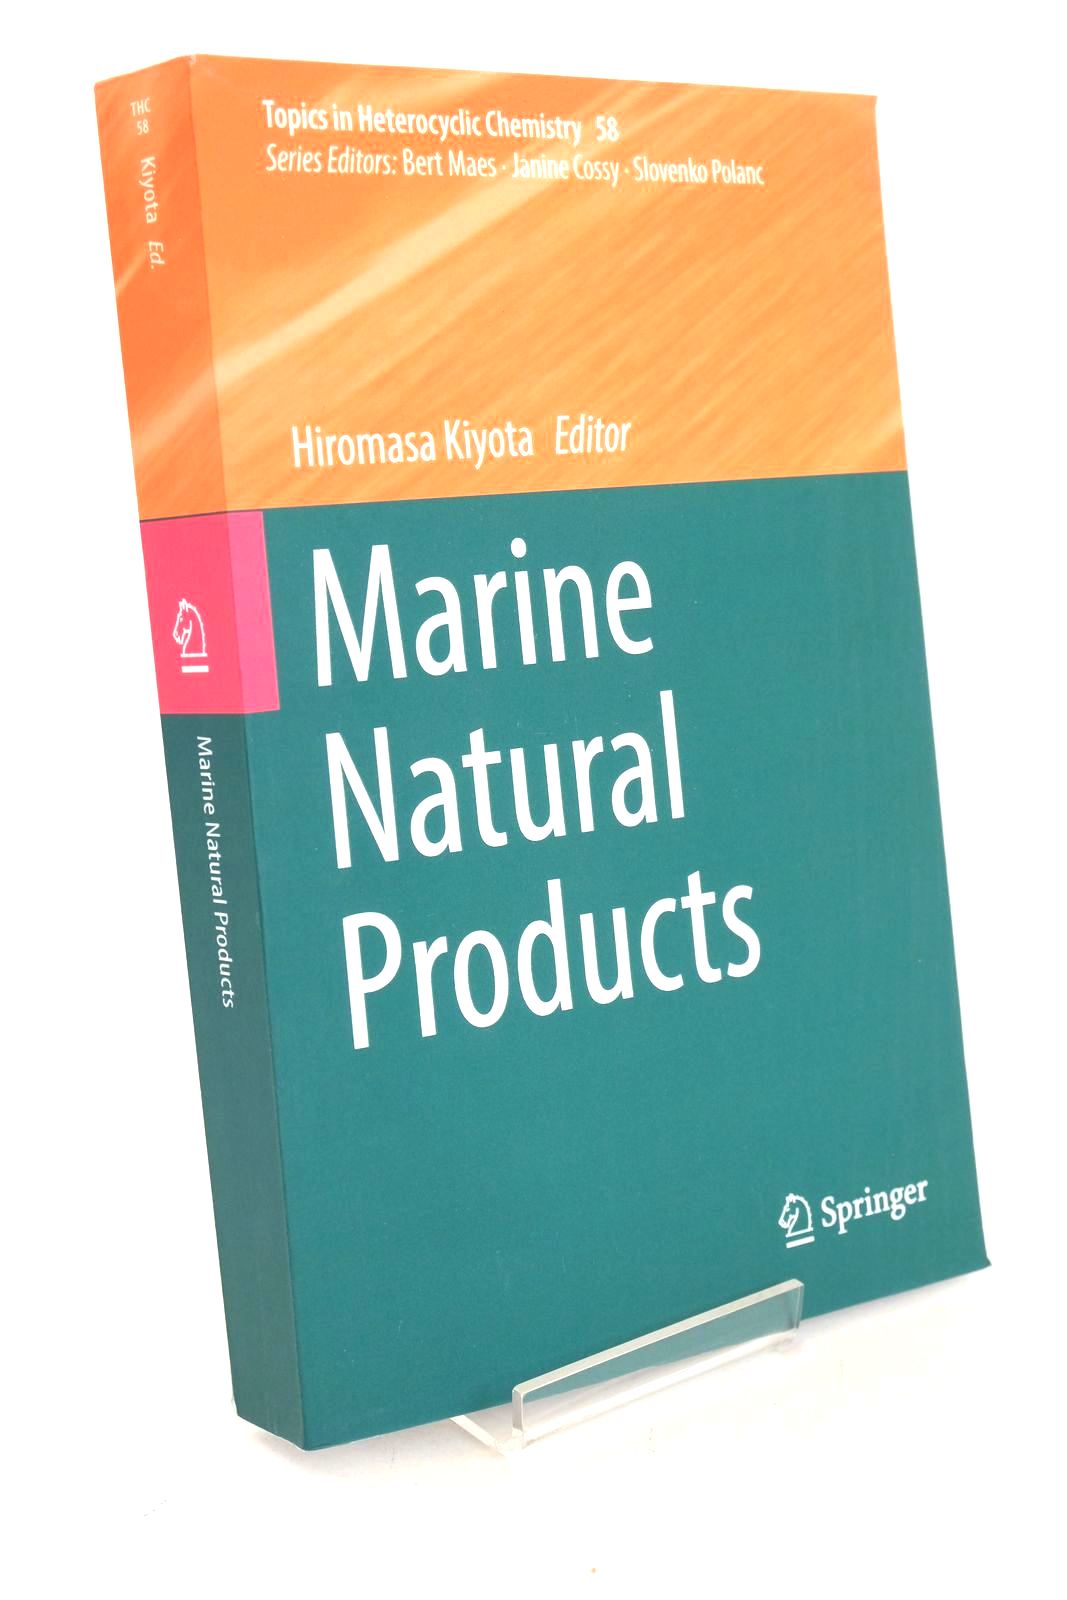 Photo of MARINE NATURAL PRODUCTS written by Kiyota, Hiromasa published by Springer (STOCK CODE: 1327153)  for sale by Stella & Rose's Books